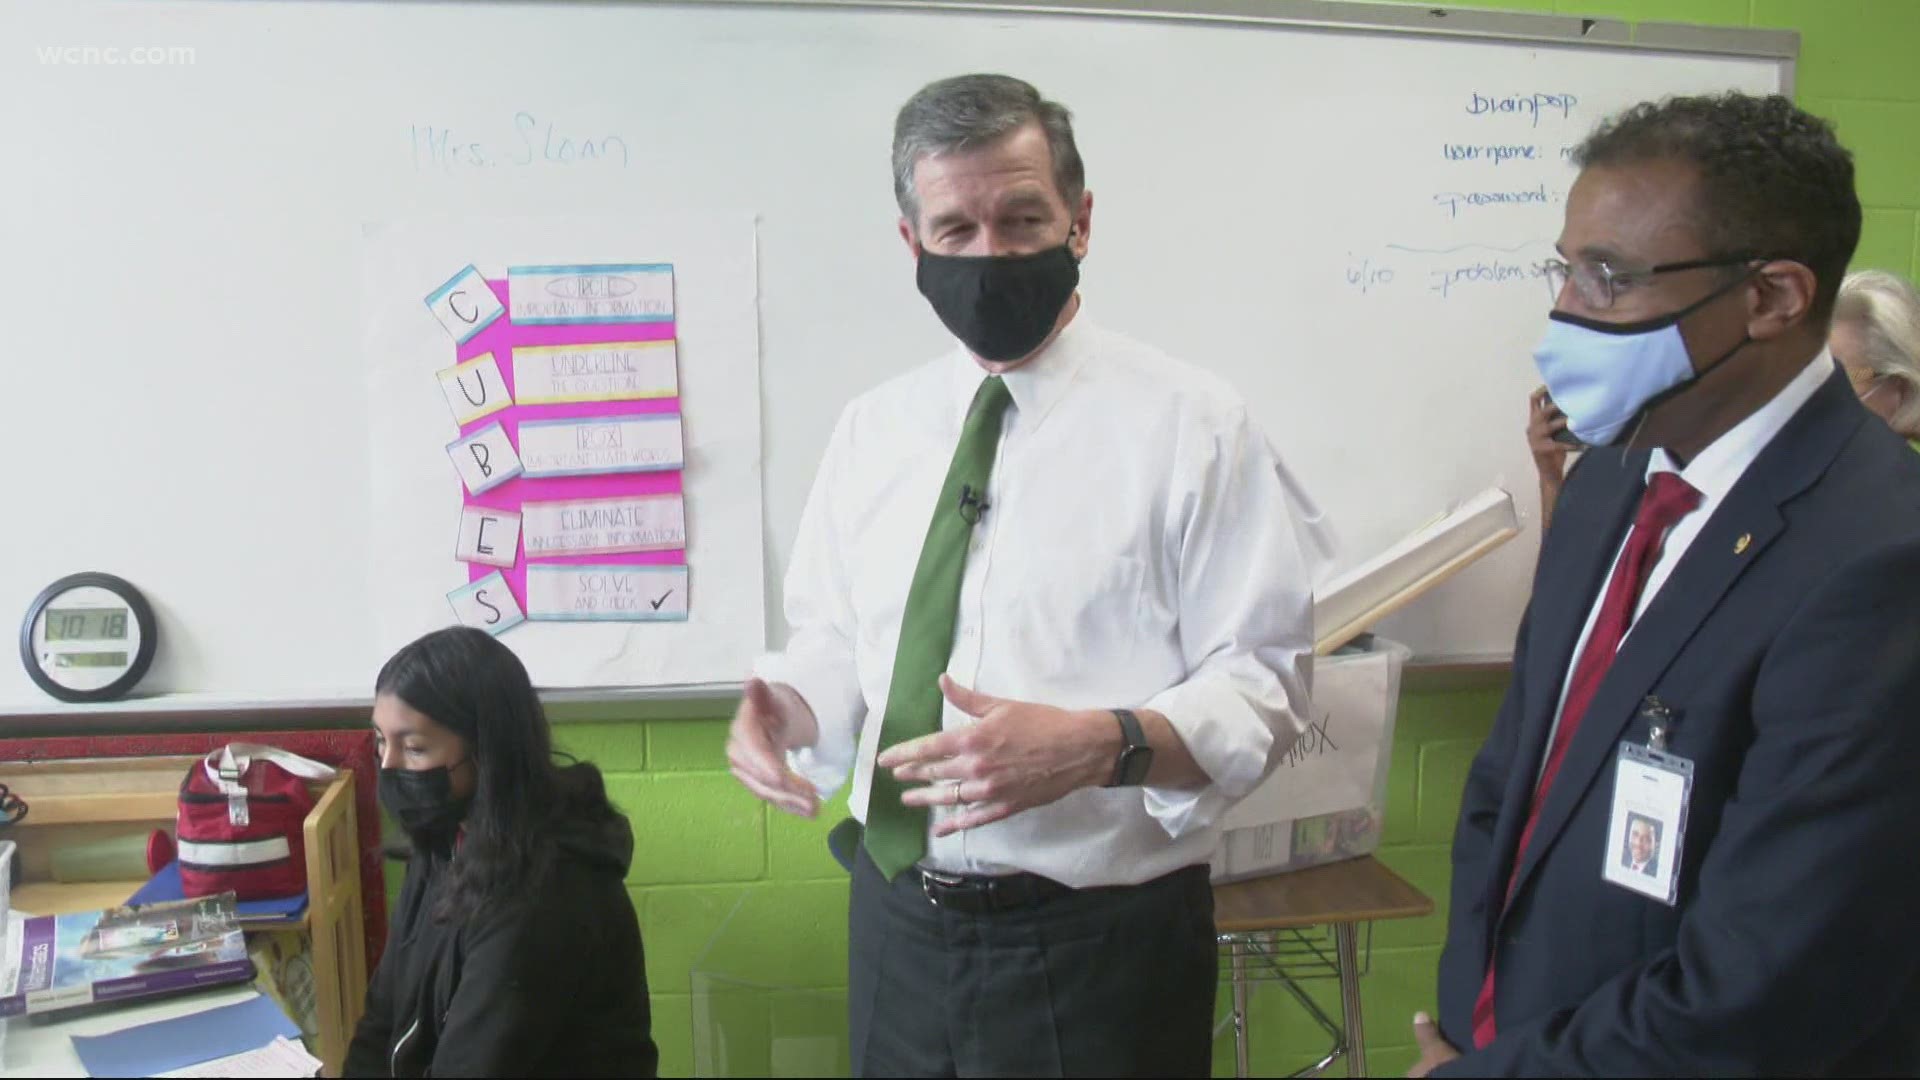 North Carolina Governor Cooper went to Salisbury to highlight the innovative teaching methods a 6th-grade teacher is making using social media.